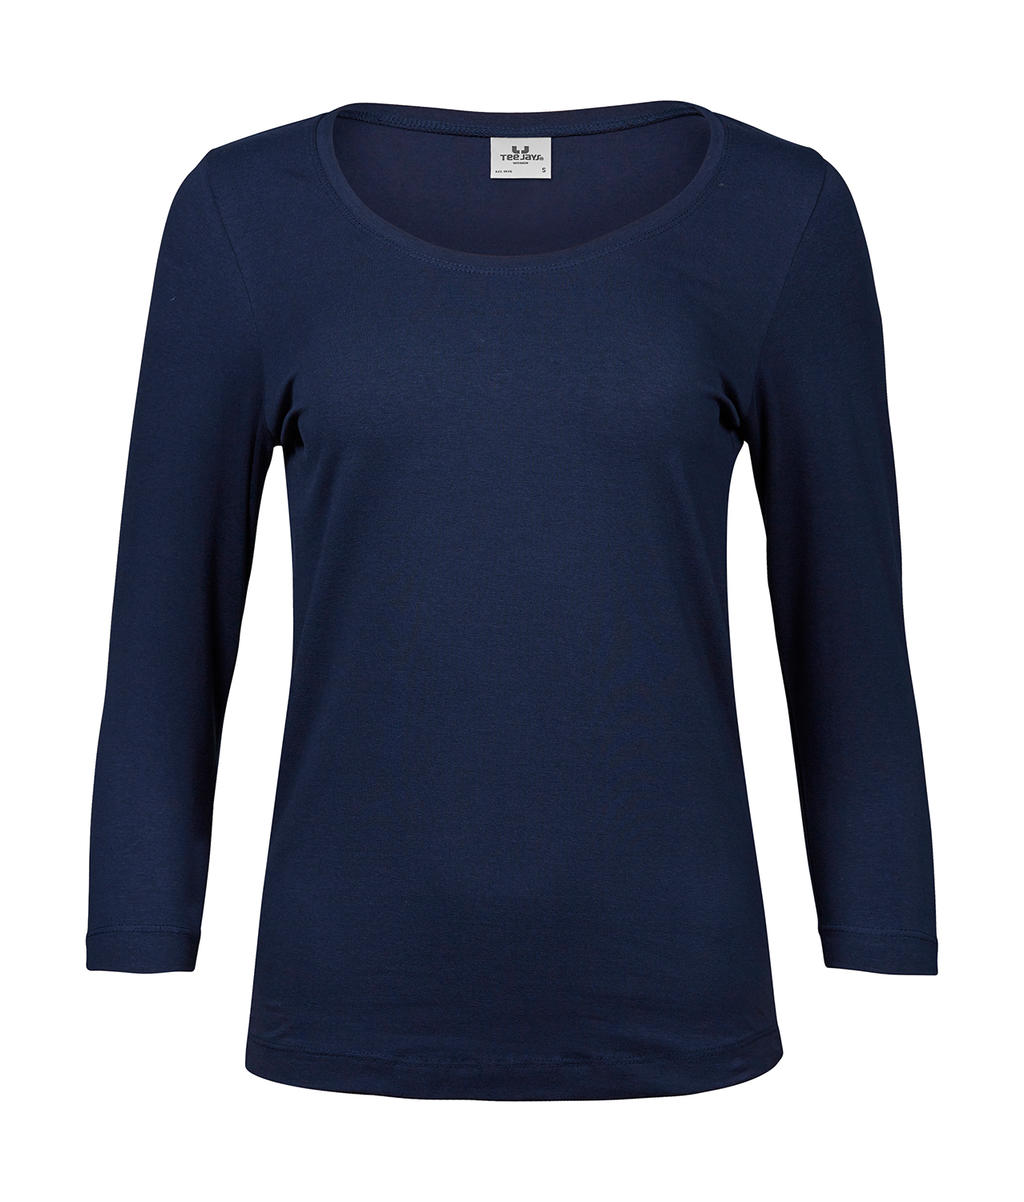  Ladies 3/4 Sleeve Stretch Tee in Farbe Navy